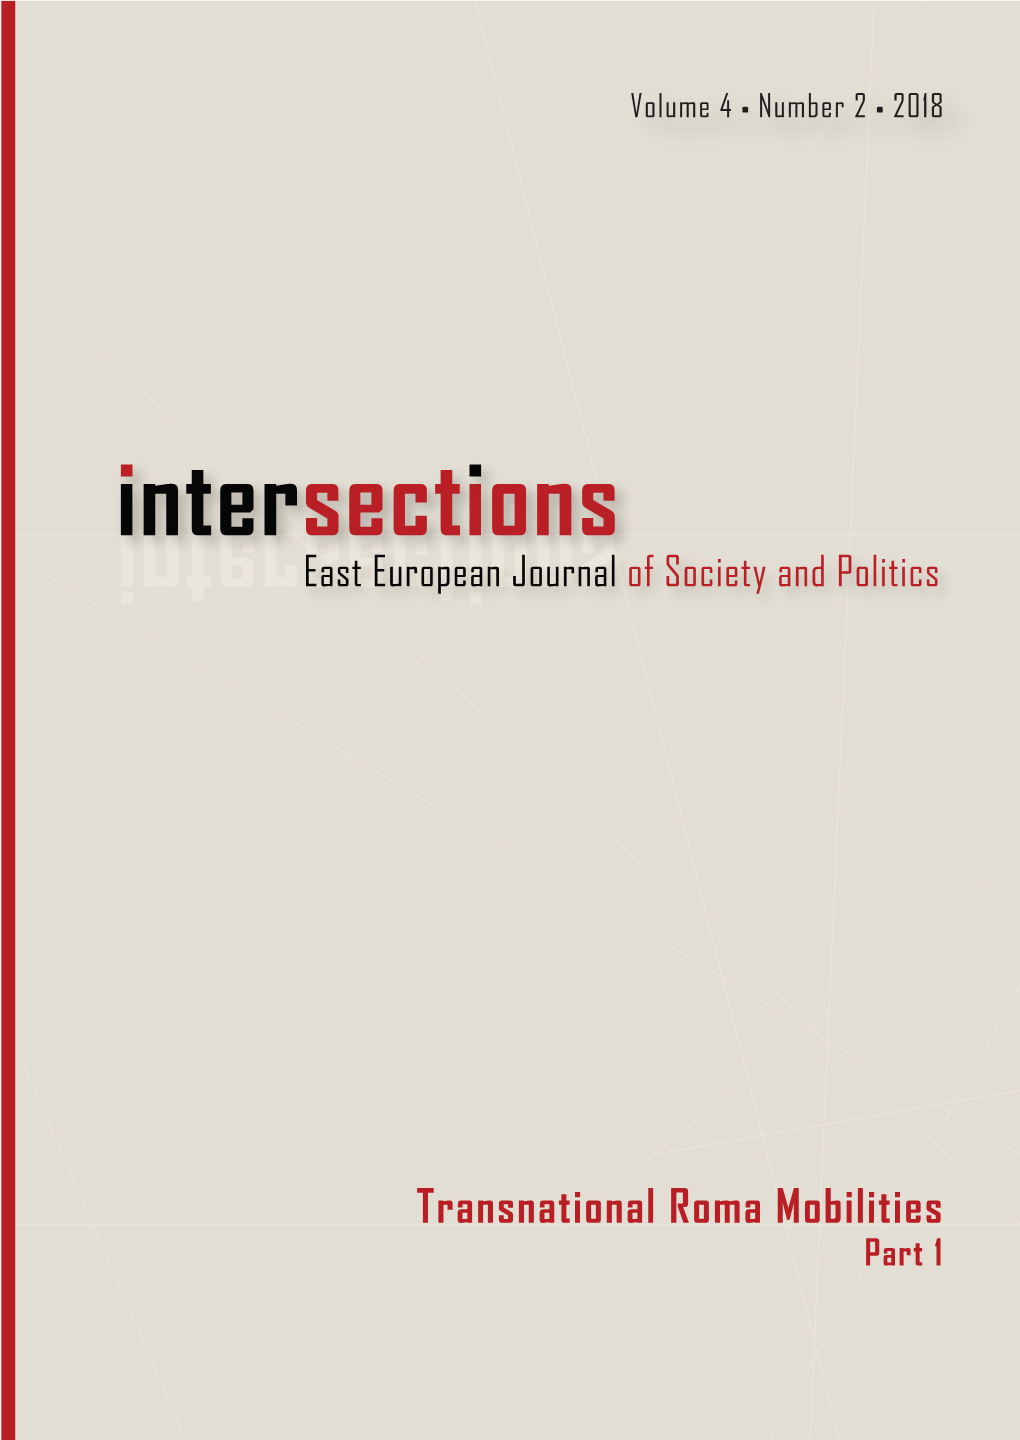 Transnational Roma Mobilities Part 1